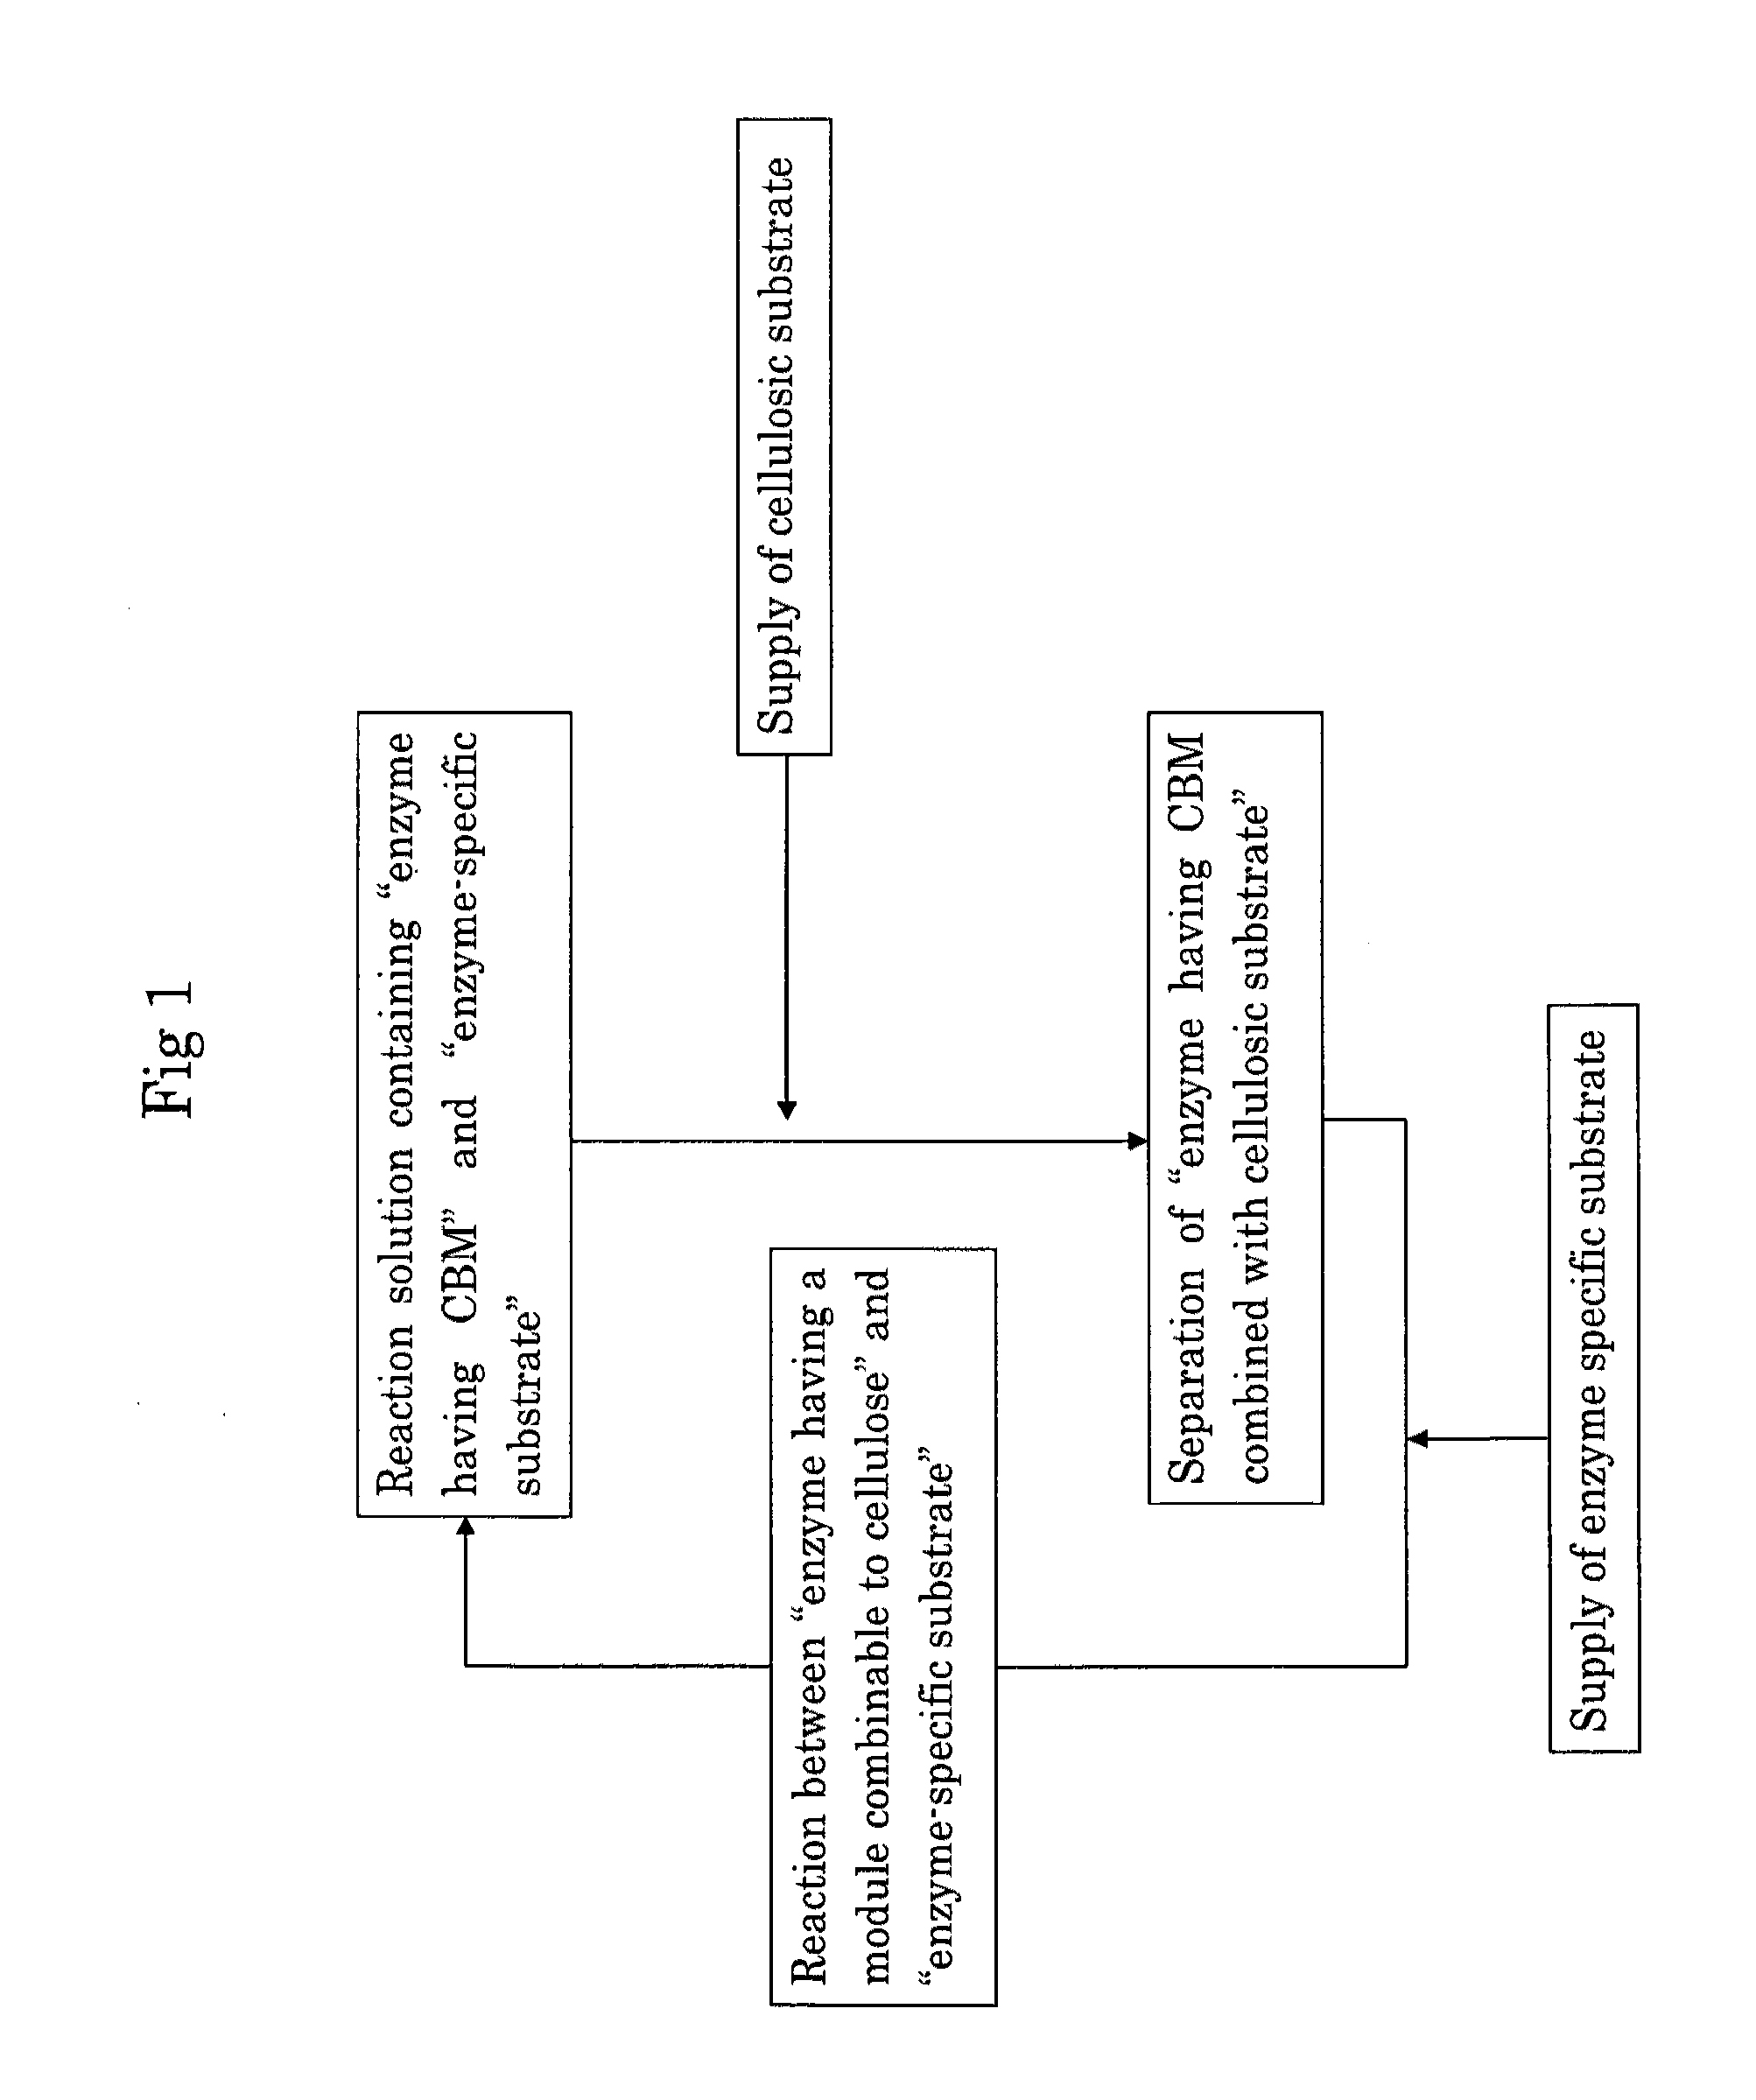 Method for recycling enzyme